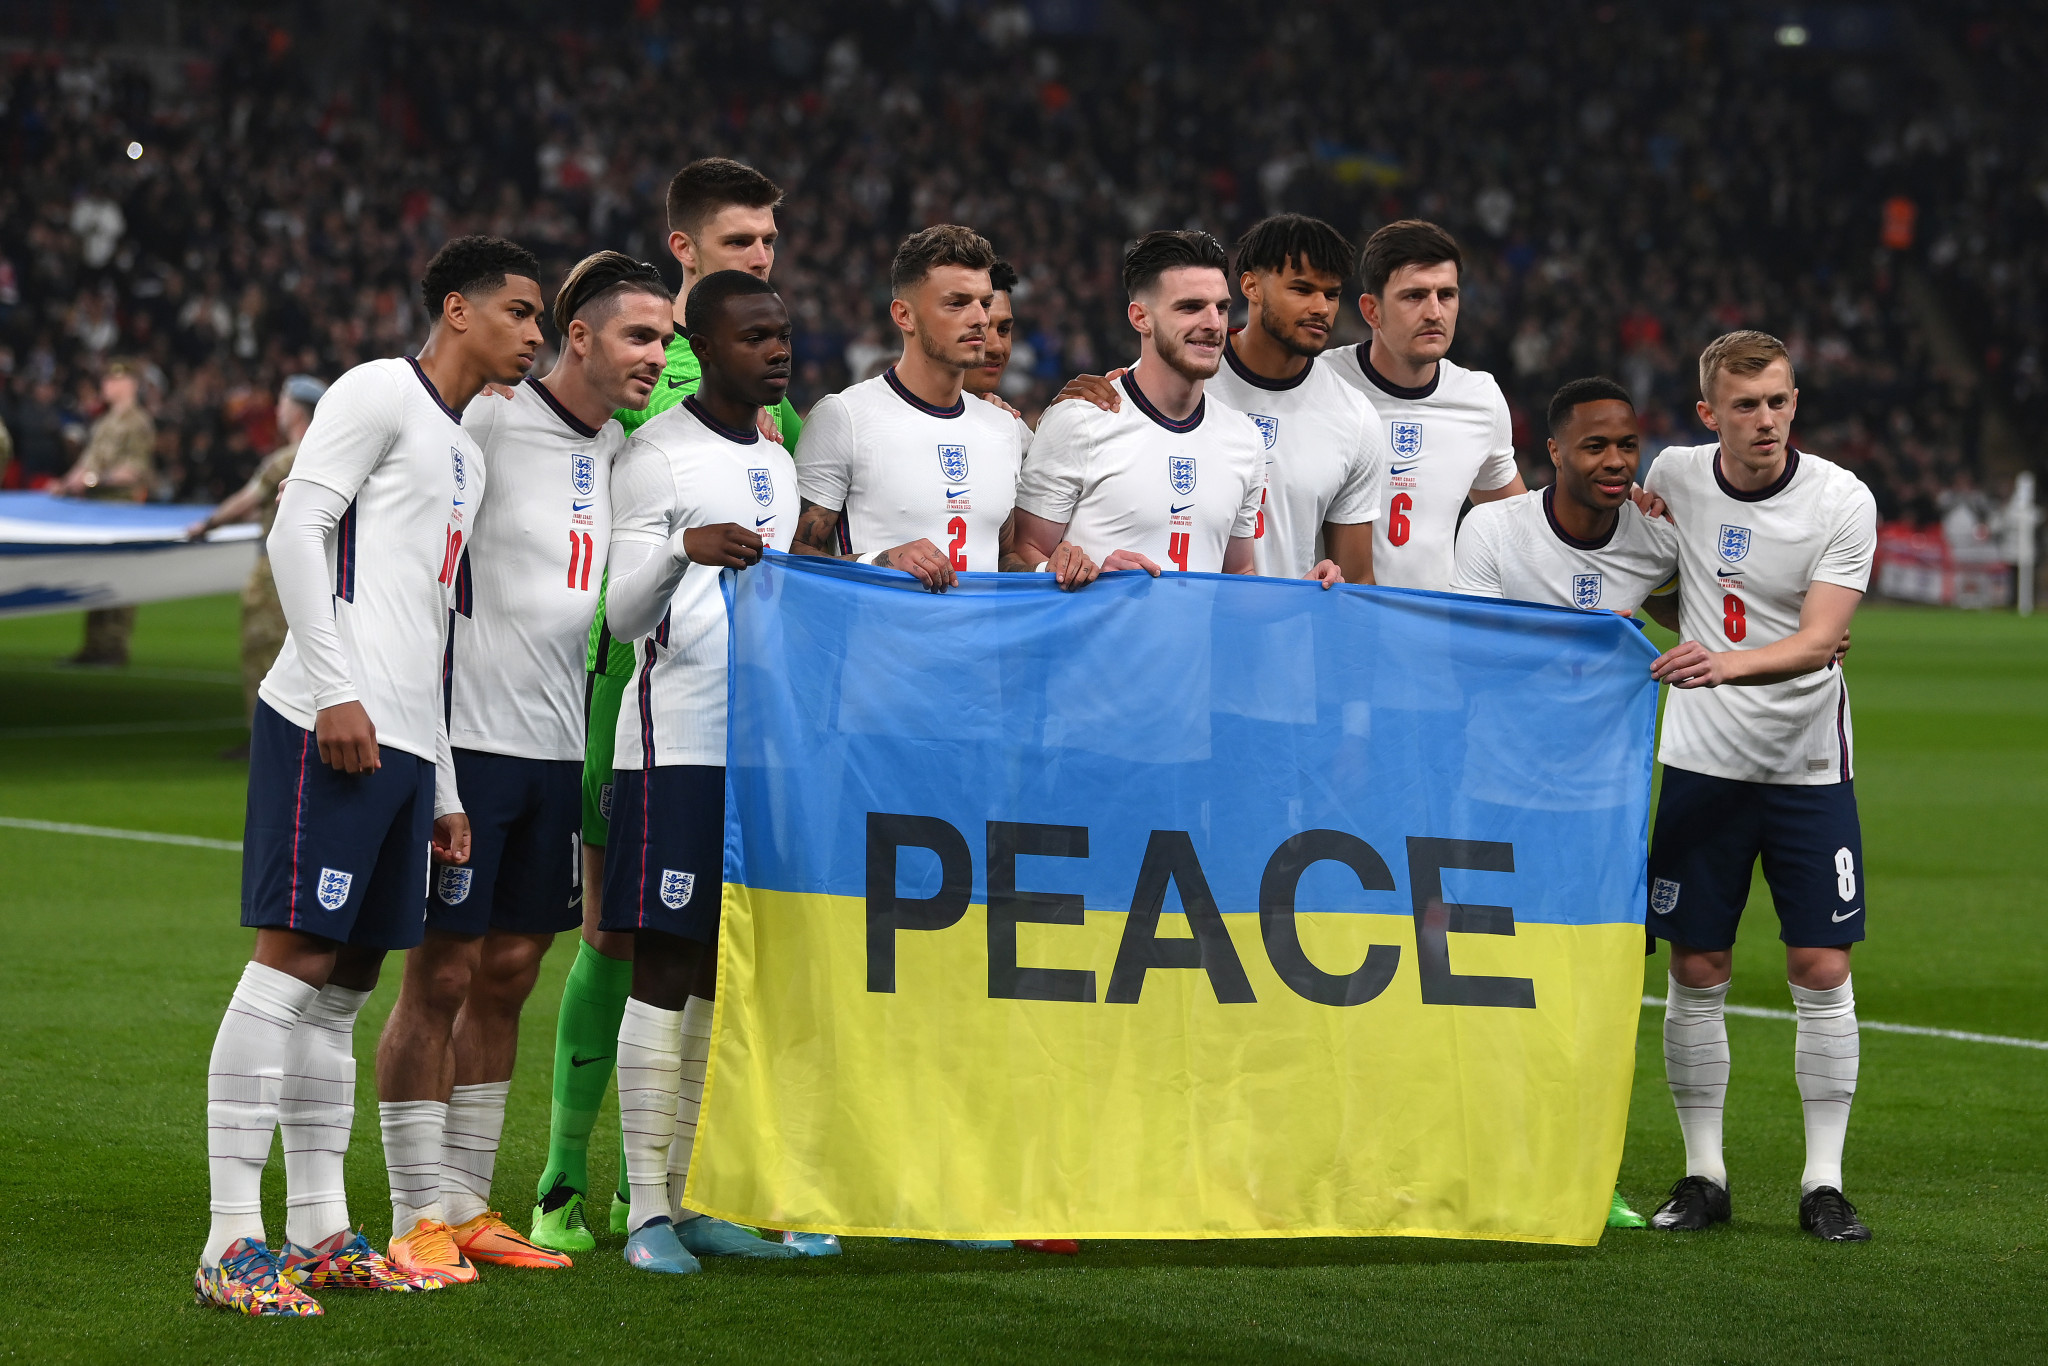 Tickets for England's match with Ukraine on Sunday have been given to 1000 refugees ©Getty Images